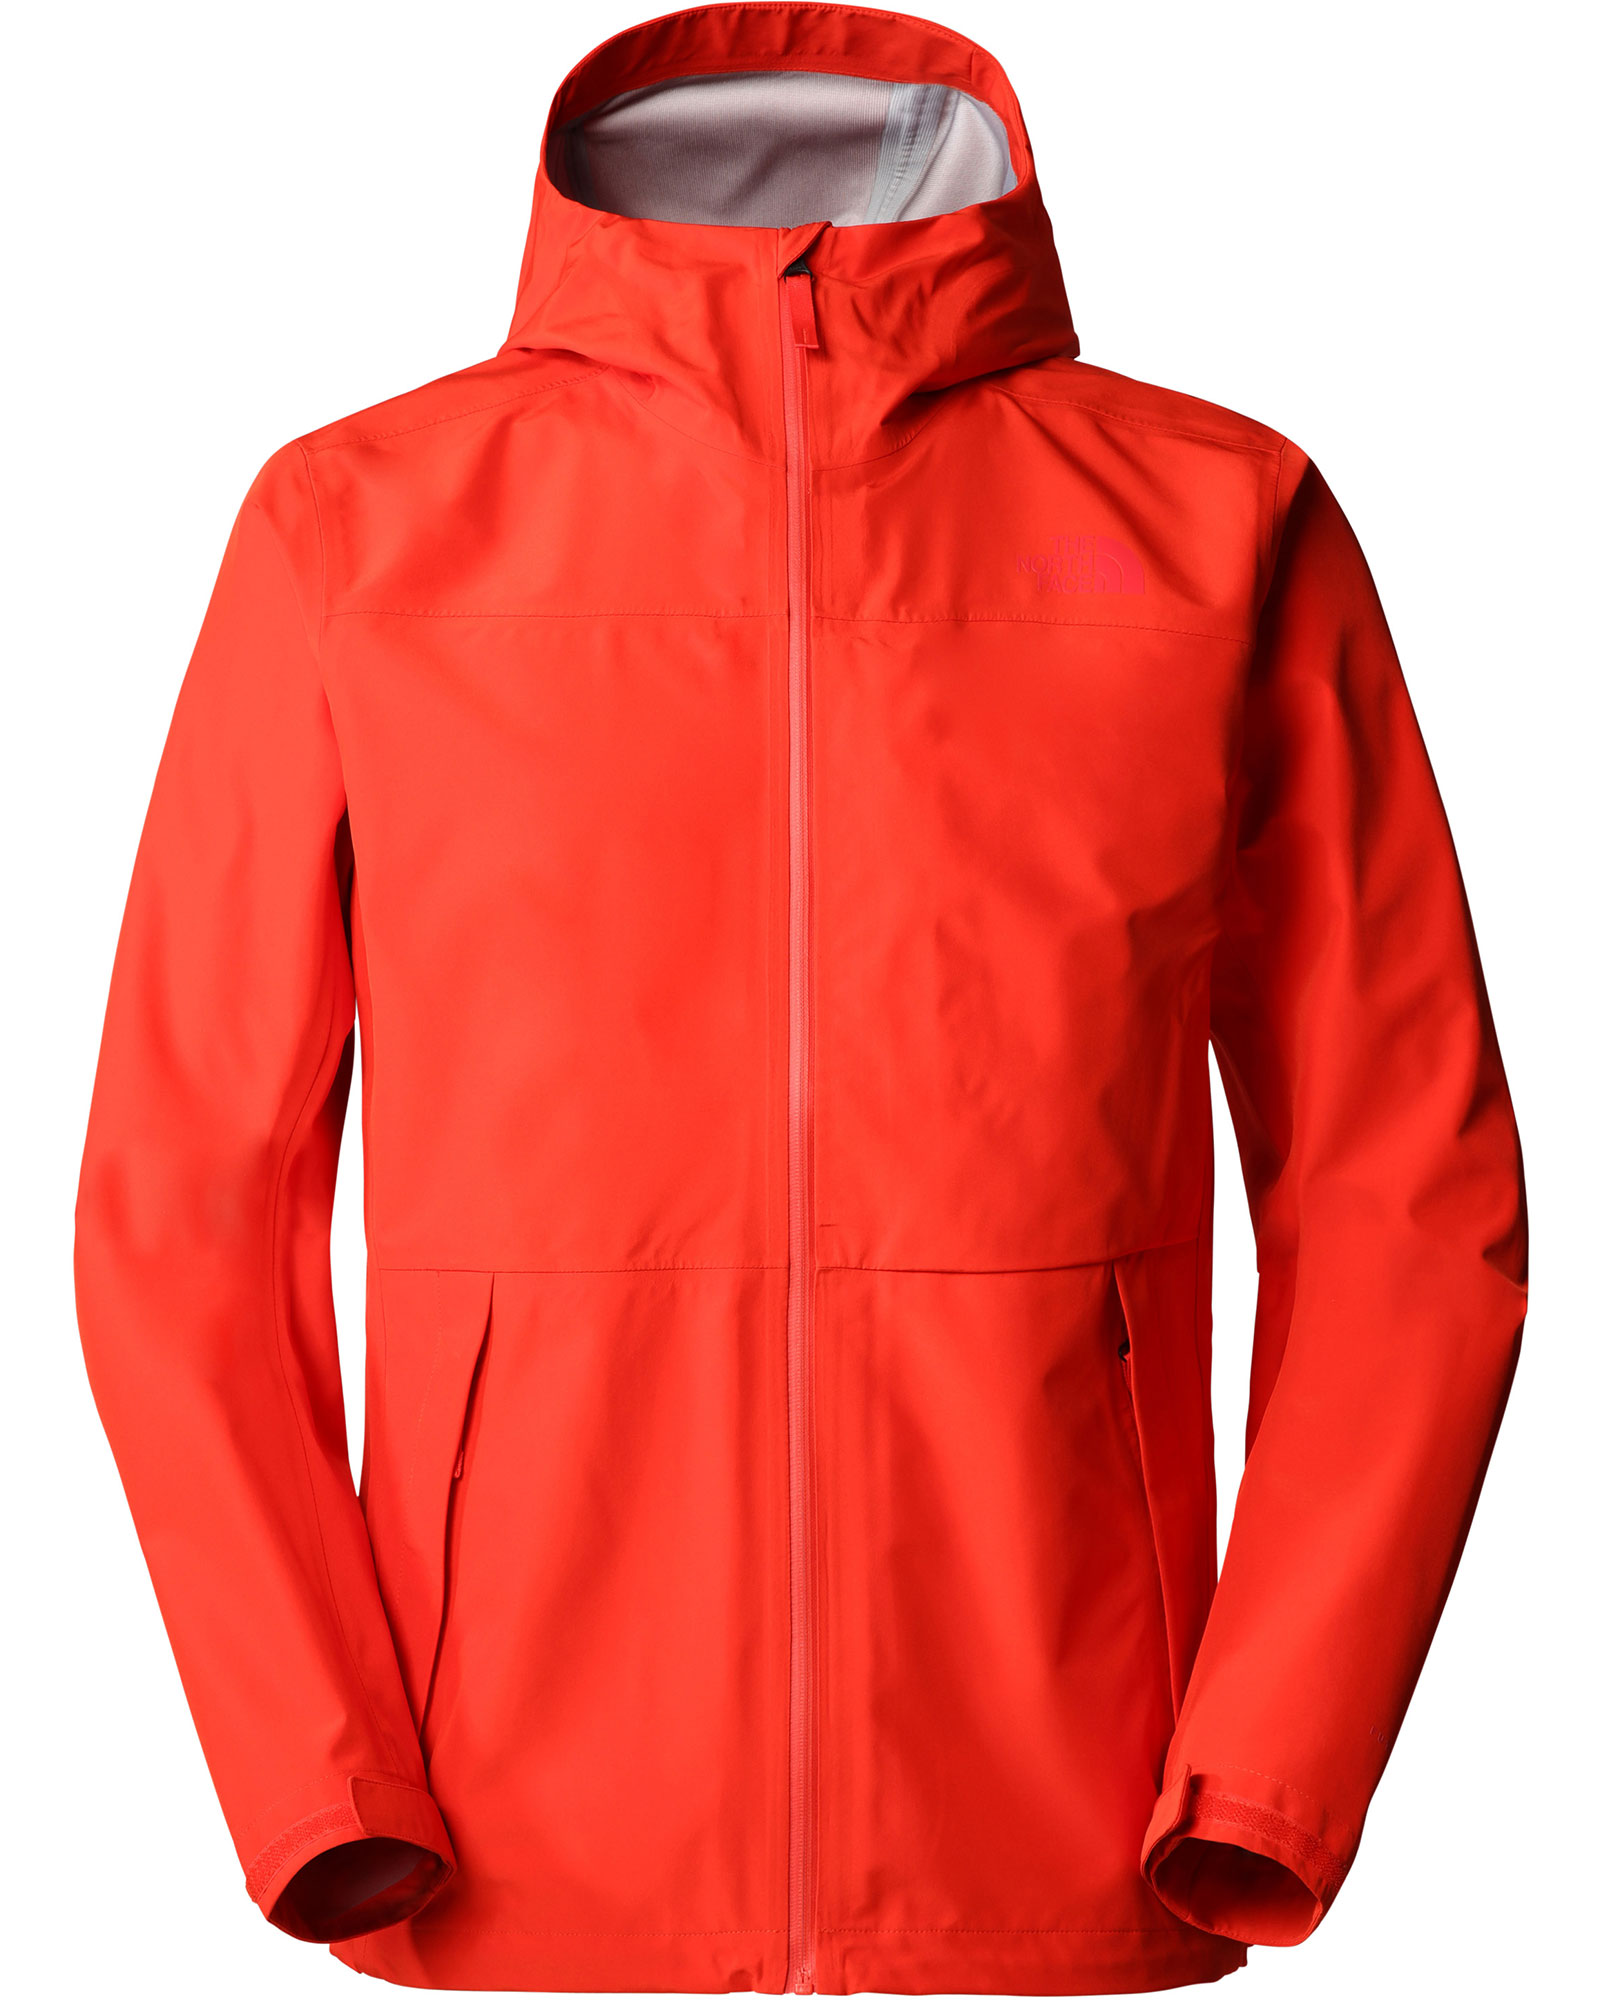 The North Face Dryzzle FUTURELIGHT Men’s Jacket - Fiery Red S